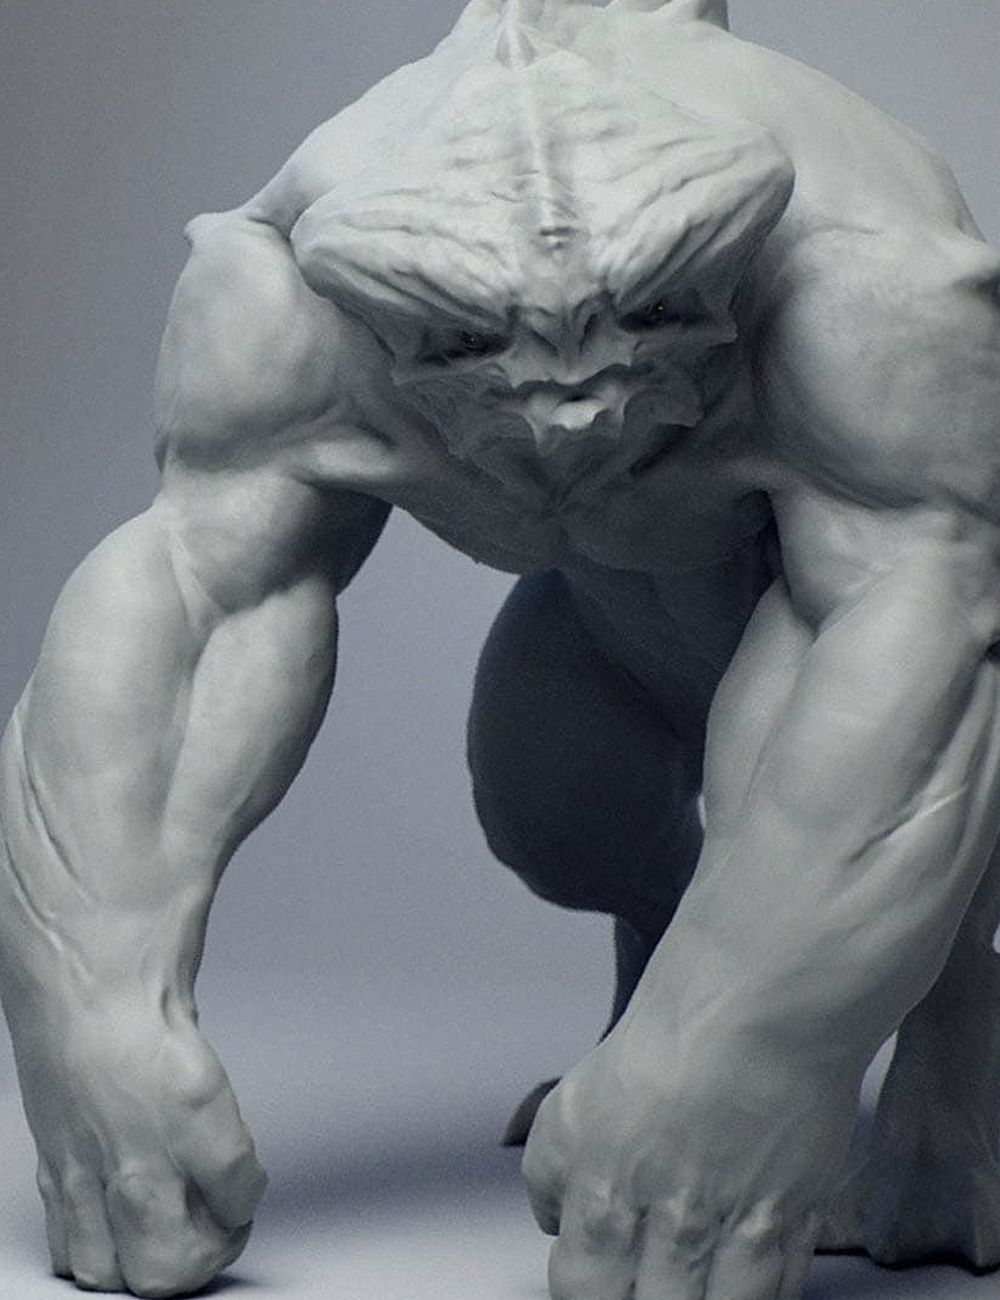 professional series creature concepting in zbrush